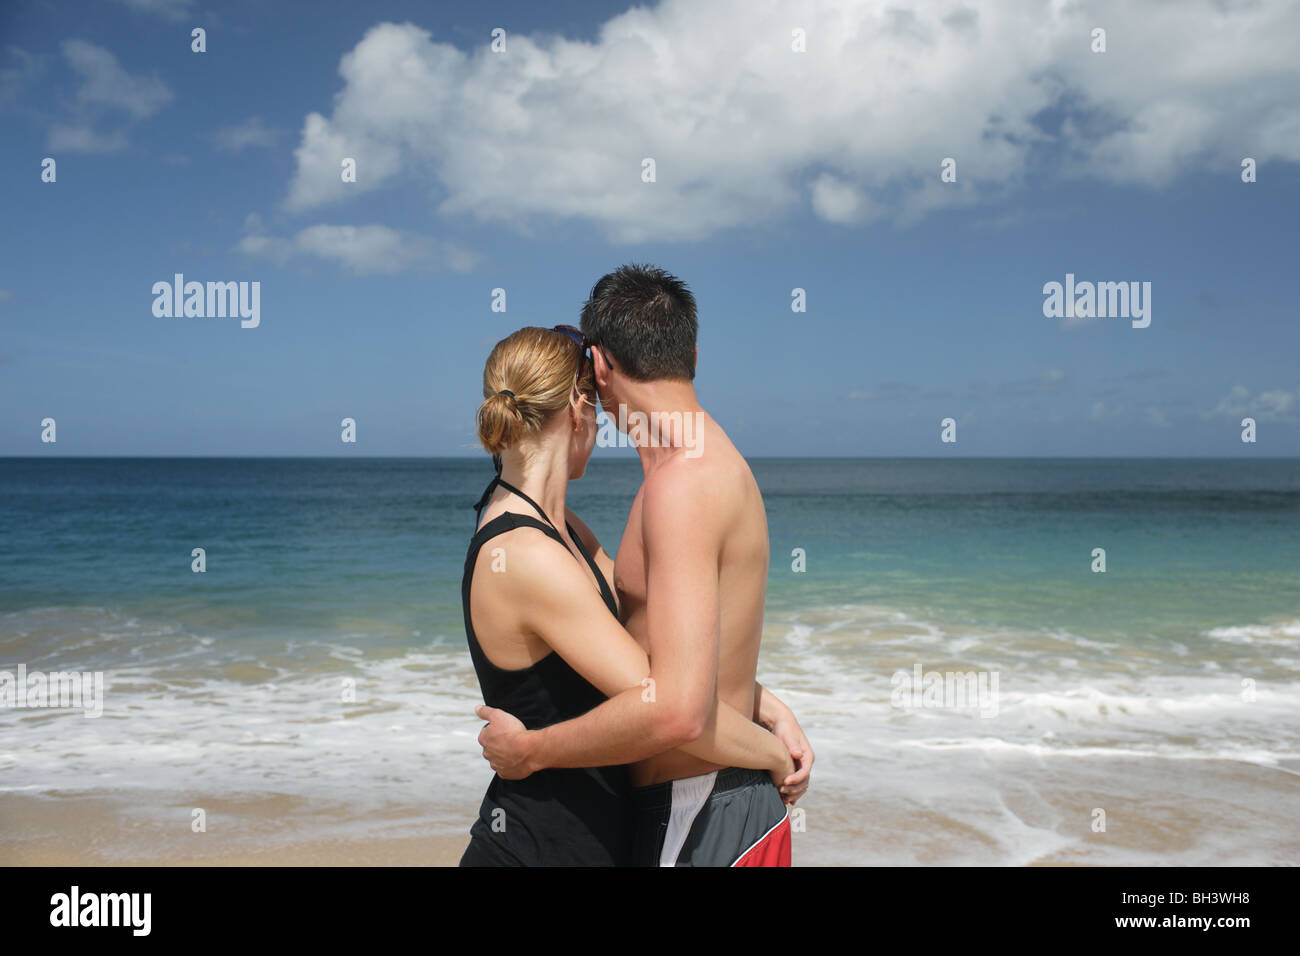 Young couple embracing looking out towards the horizon on a deserted tropical beach Stock Photo